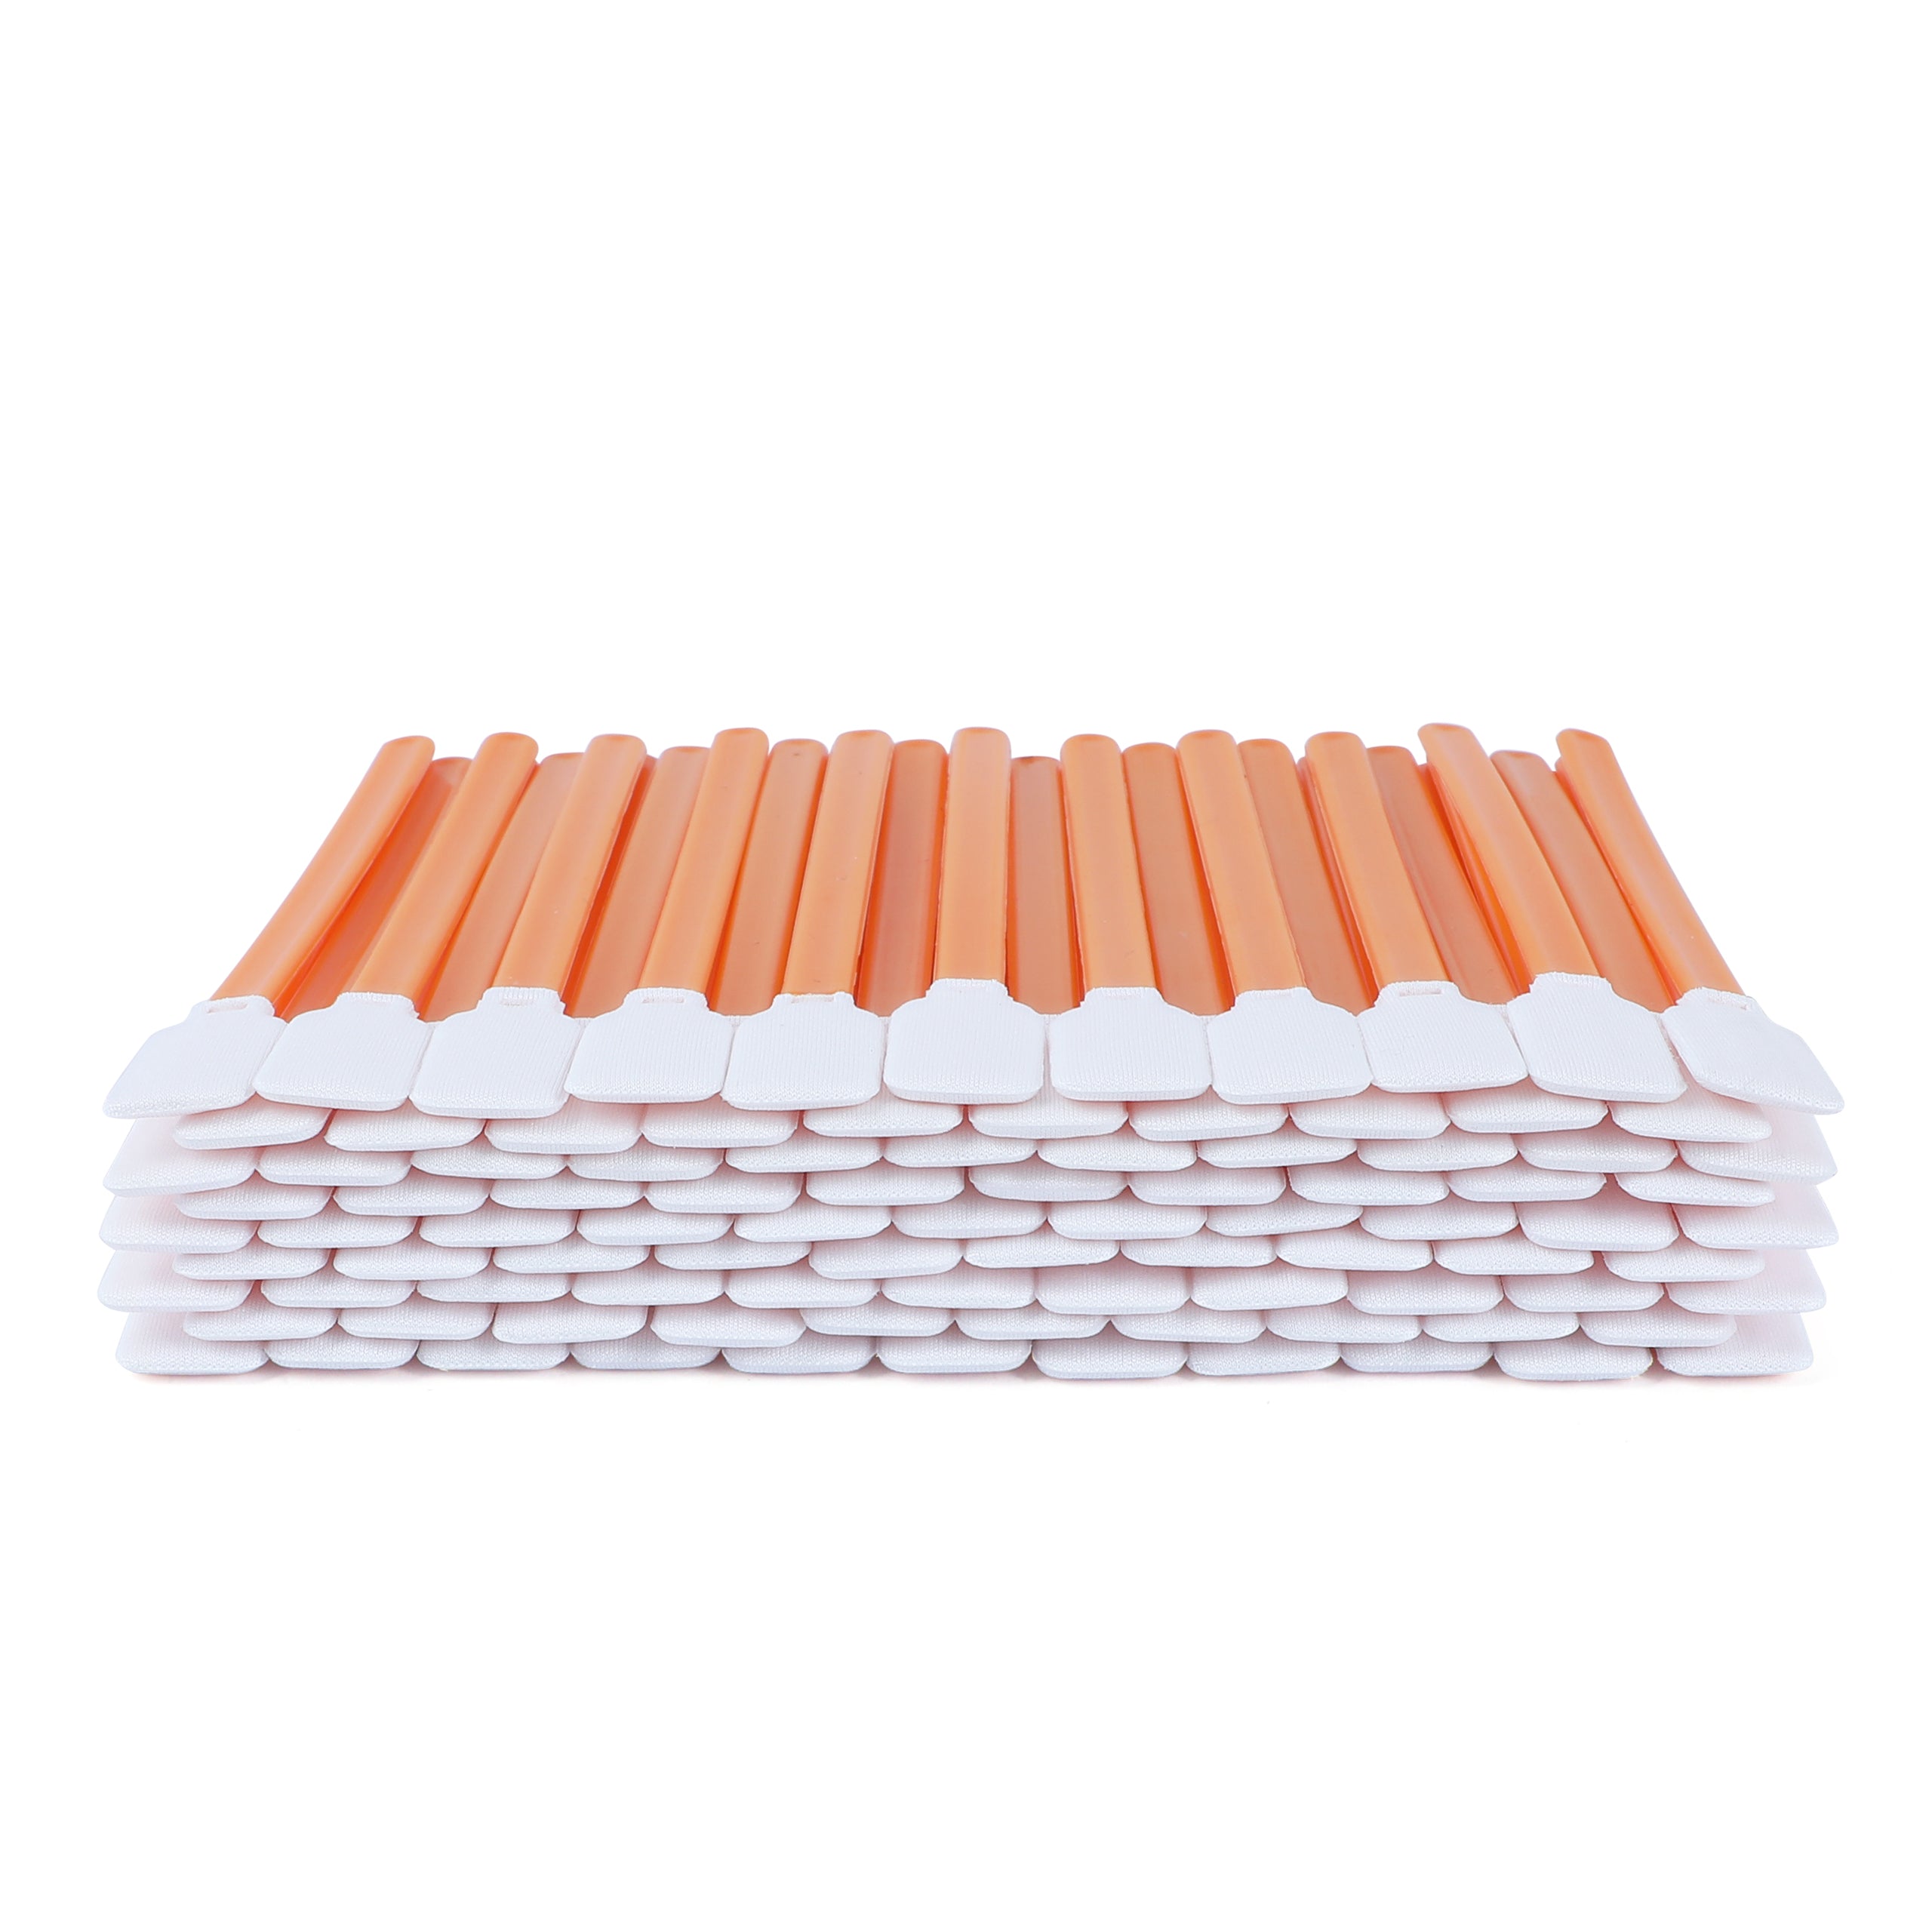 4.92" Wide Square Polyester Swabs (1,000 pcs, Large Flat Square Polyester Head 13.5 mm/0.53", Knitted Polyester) (No. A5125A)